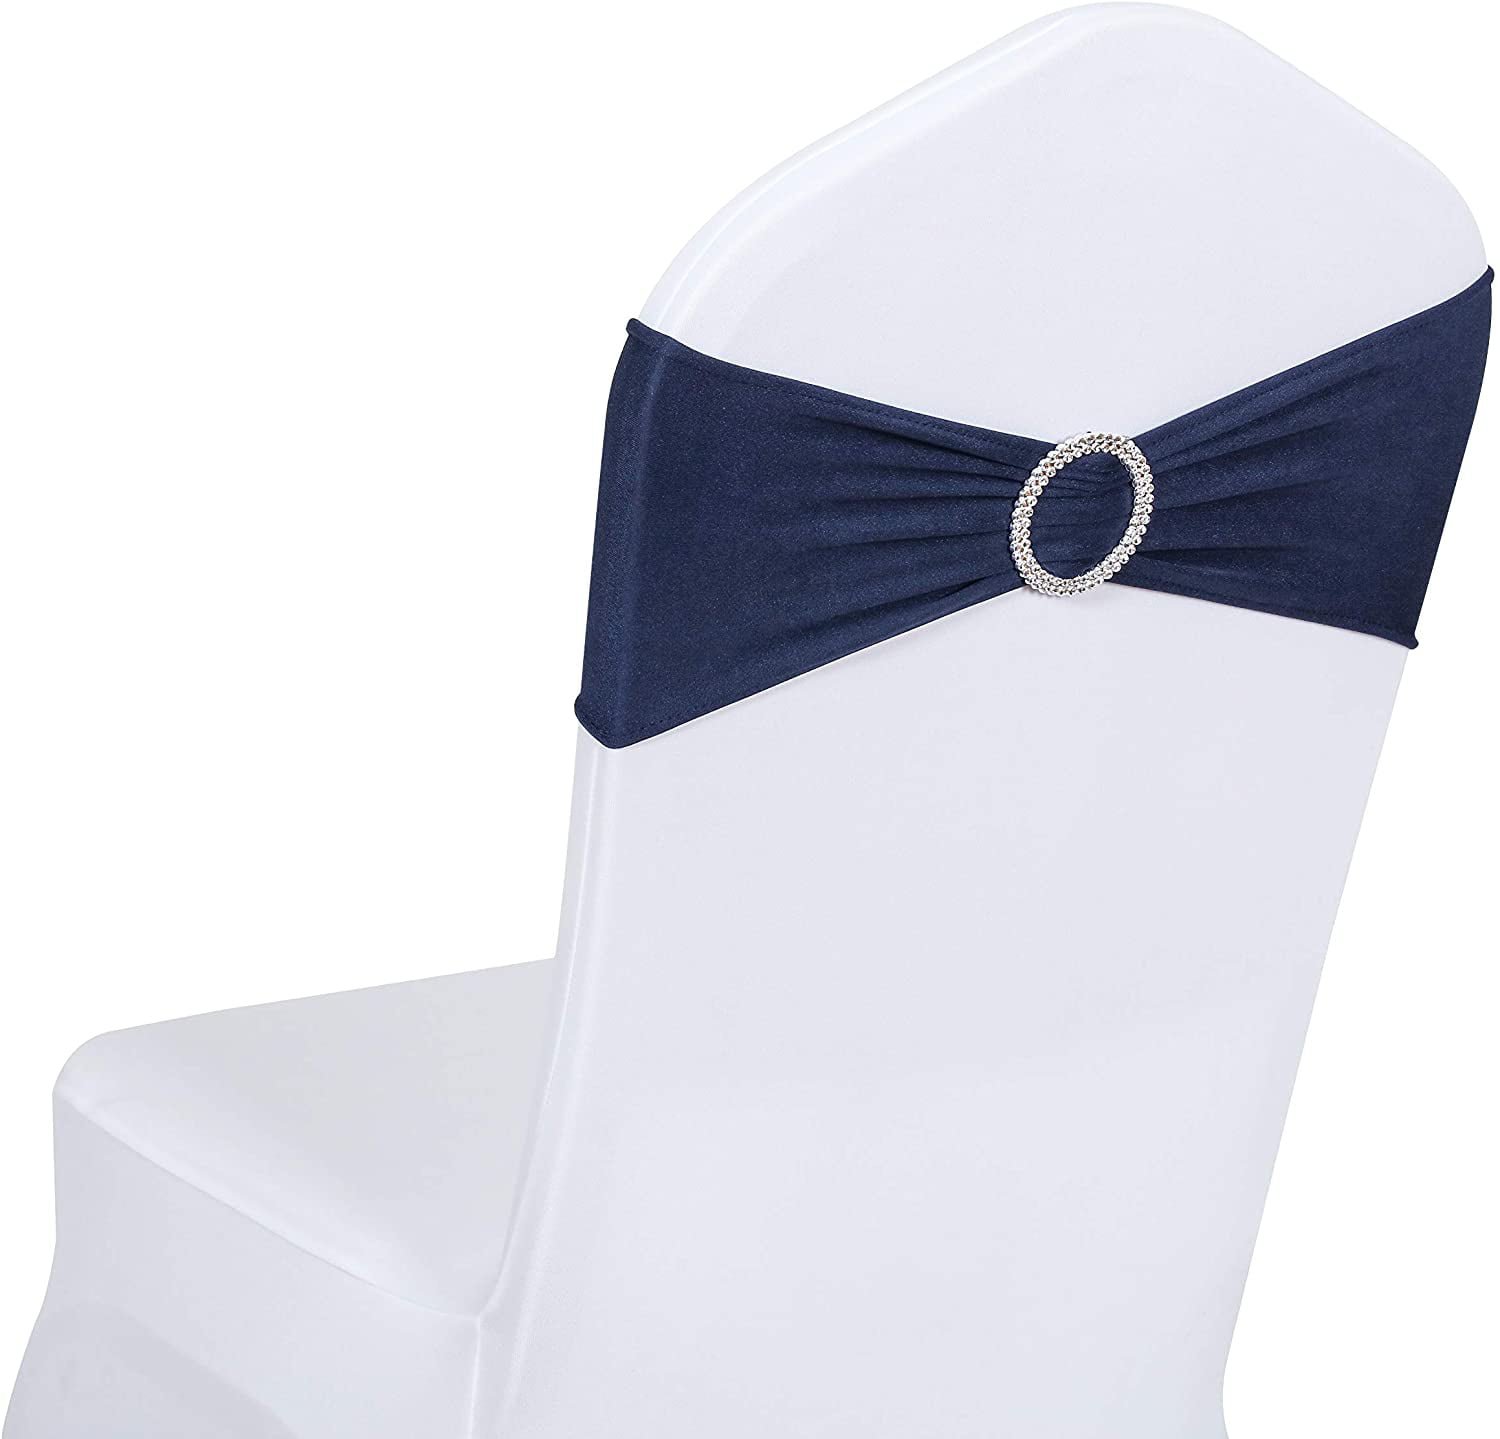 100 x Spandex Stretch Tie Chair Sash Wedding Party Cover Band Buckle Bow Slider 